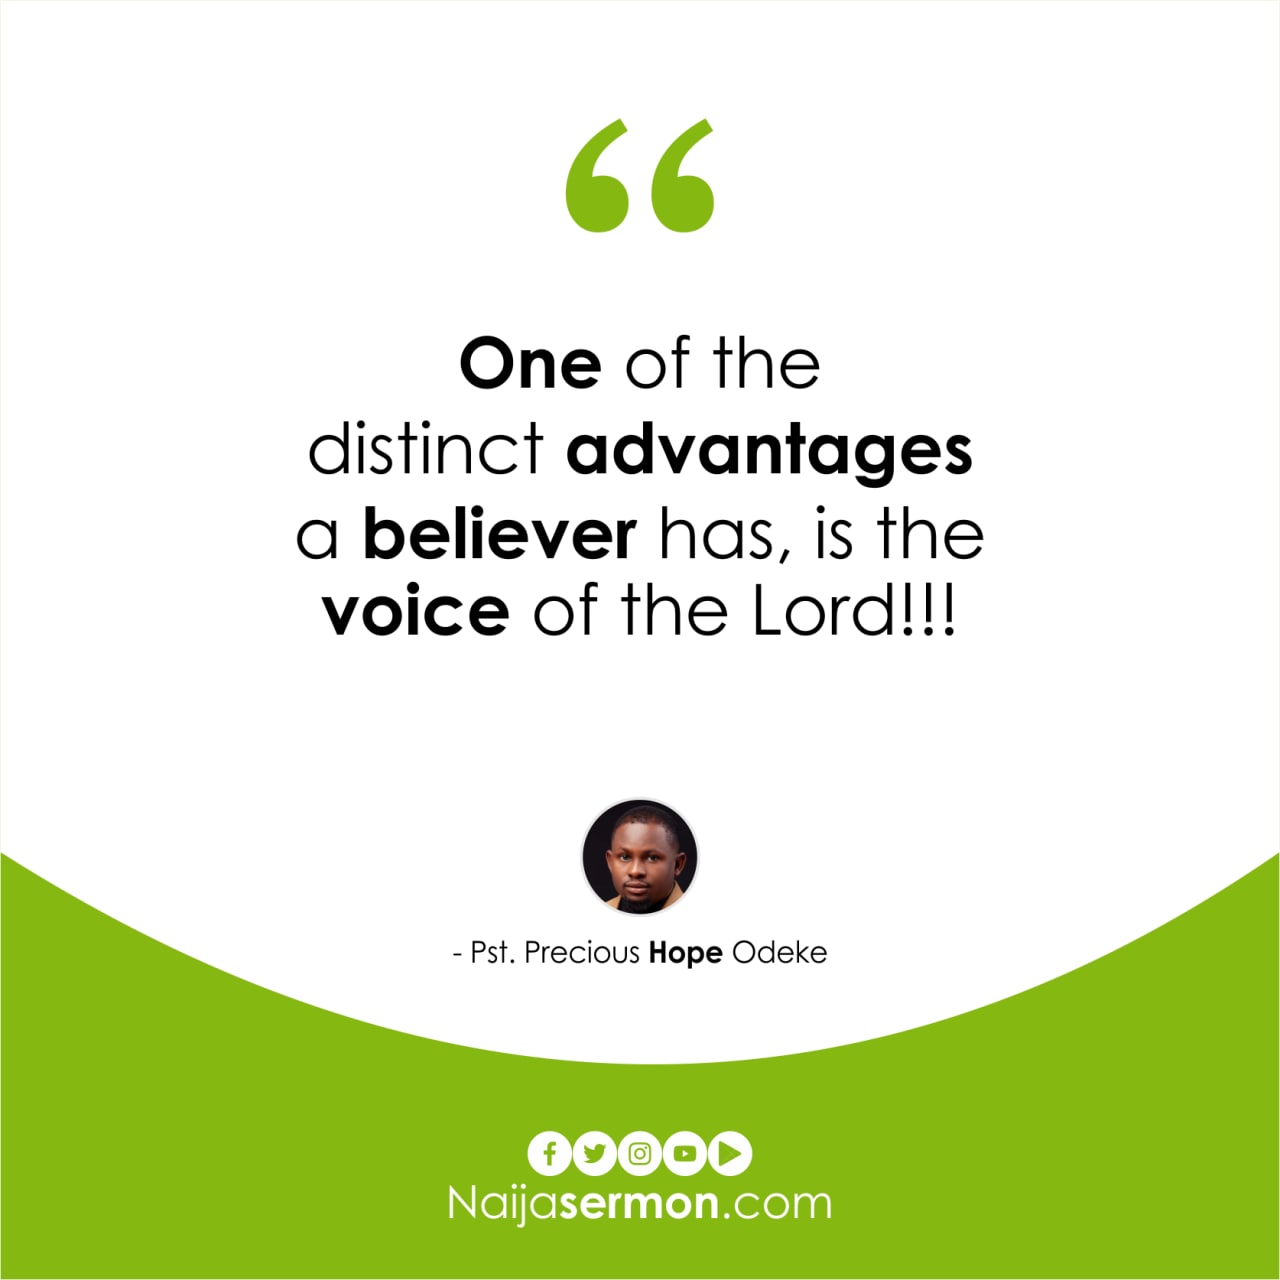 QUOTE OF THE DAY BY PST. PRECIOUS HOPE ODEKE 19